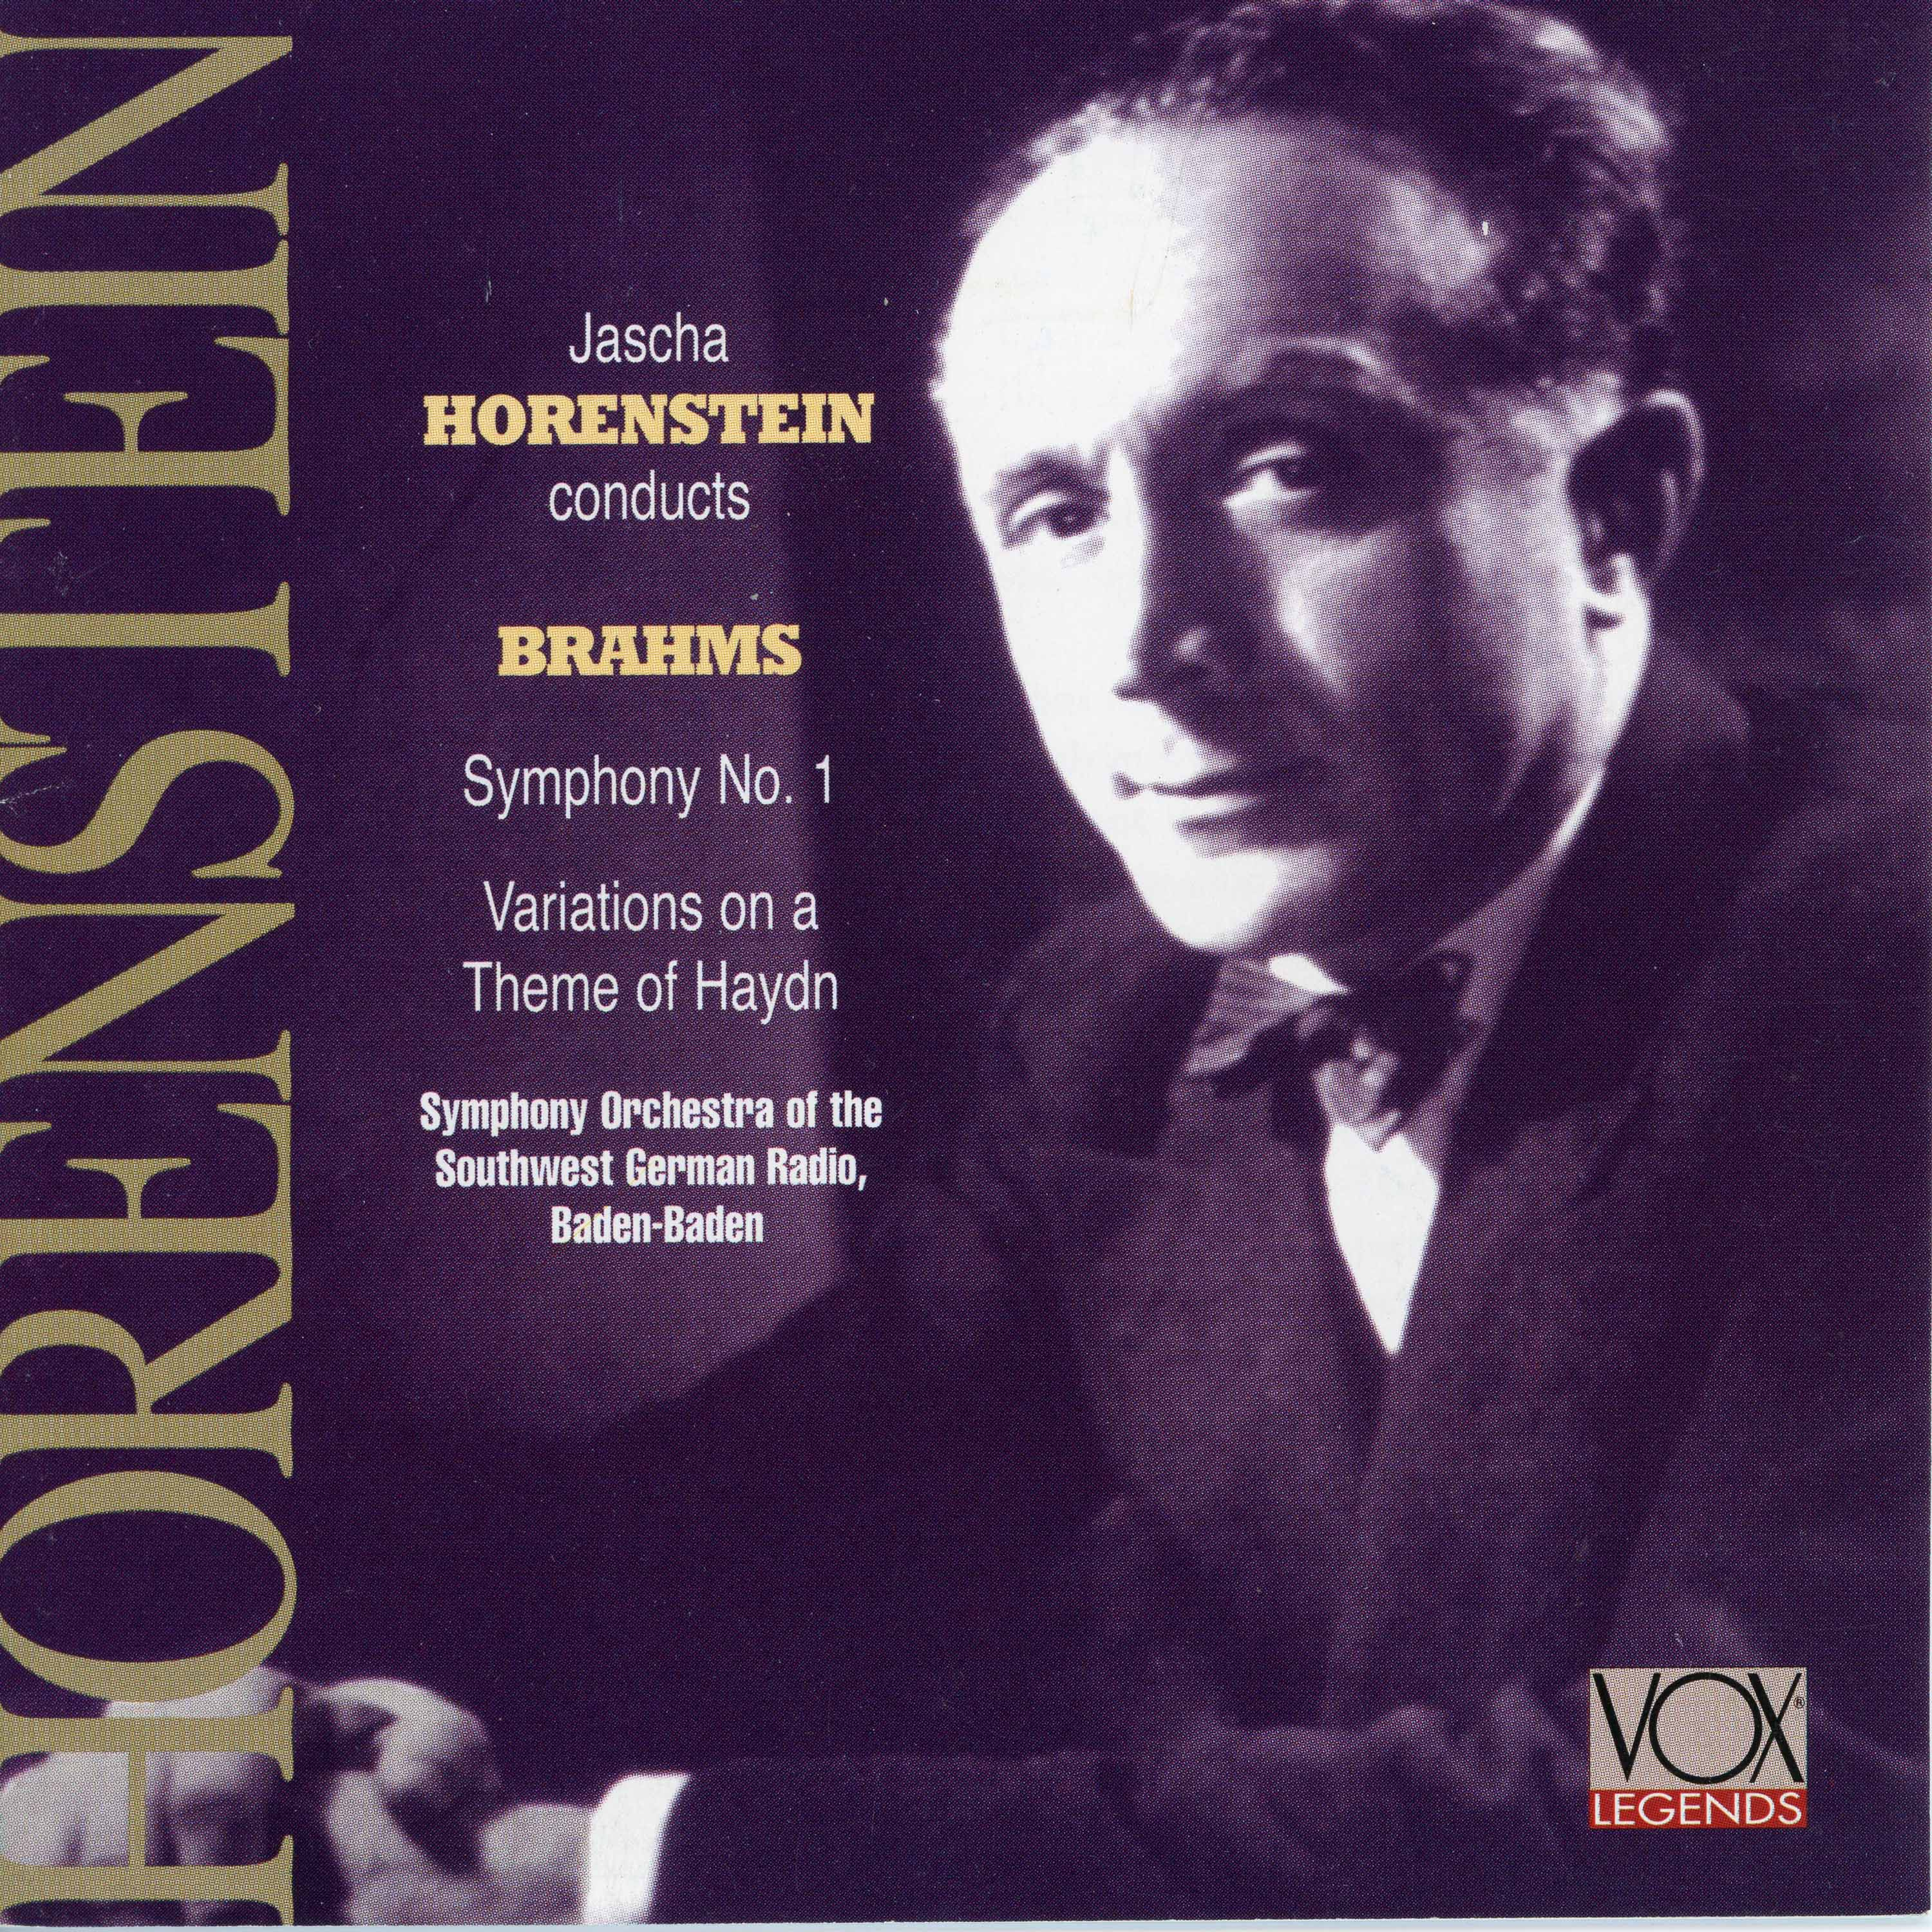 Variations on a Theme by Haydn, Op. 56a "St. Anthony Variations":Variations on a Theme by Haydn, Op. 56a "St. Anthony Variations": Var. 6, Vivace